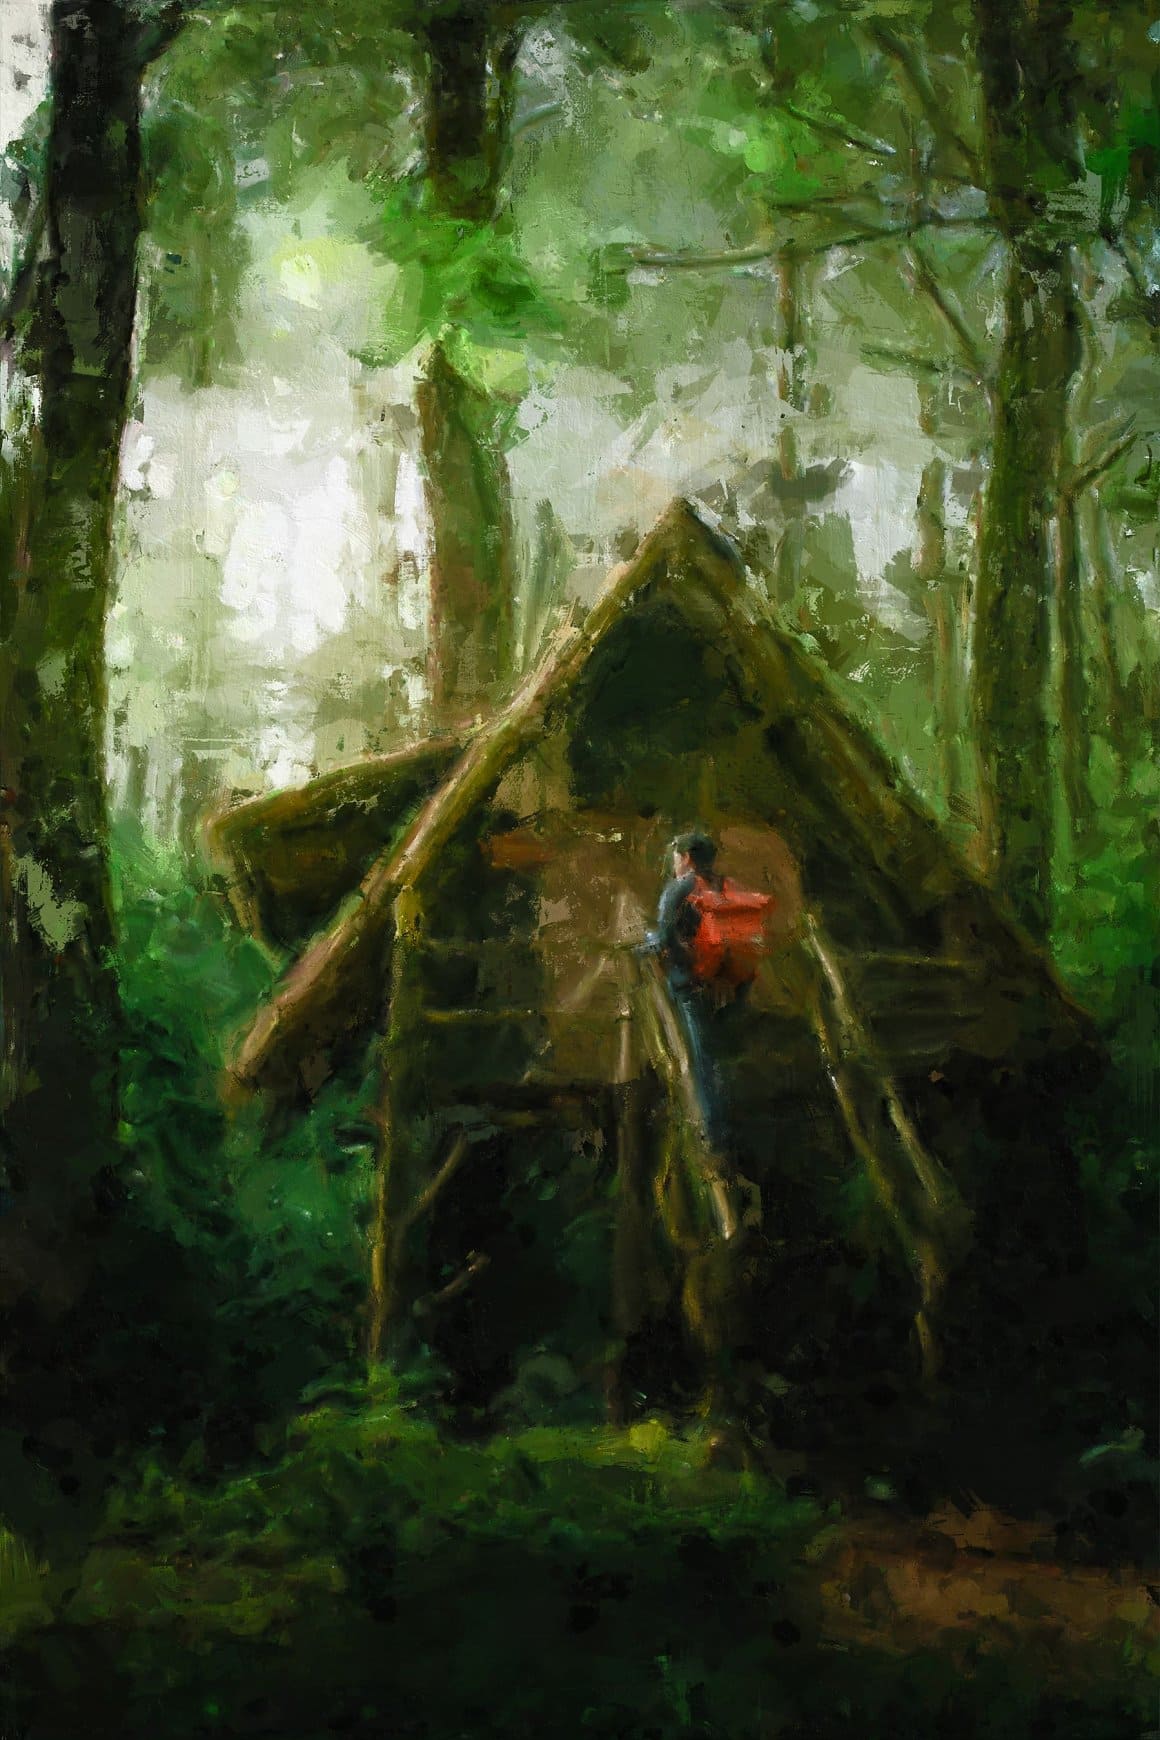 Image of a forest house using Painted Photoshop Effect.